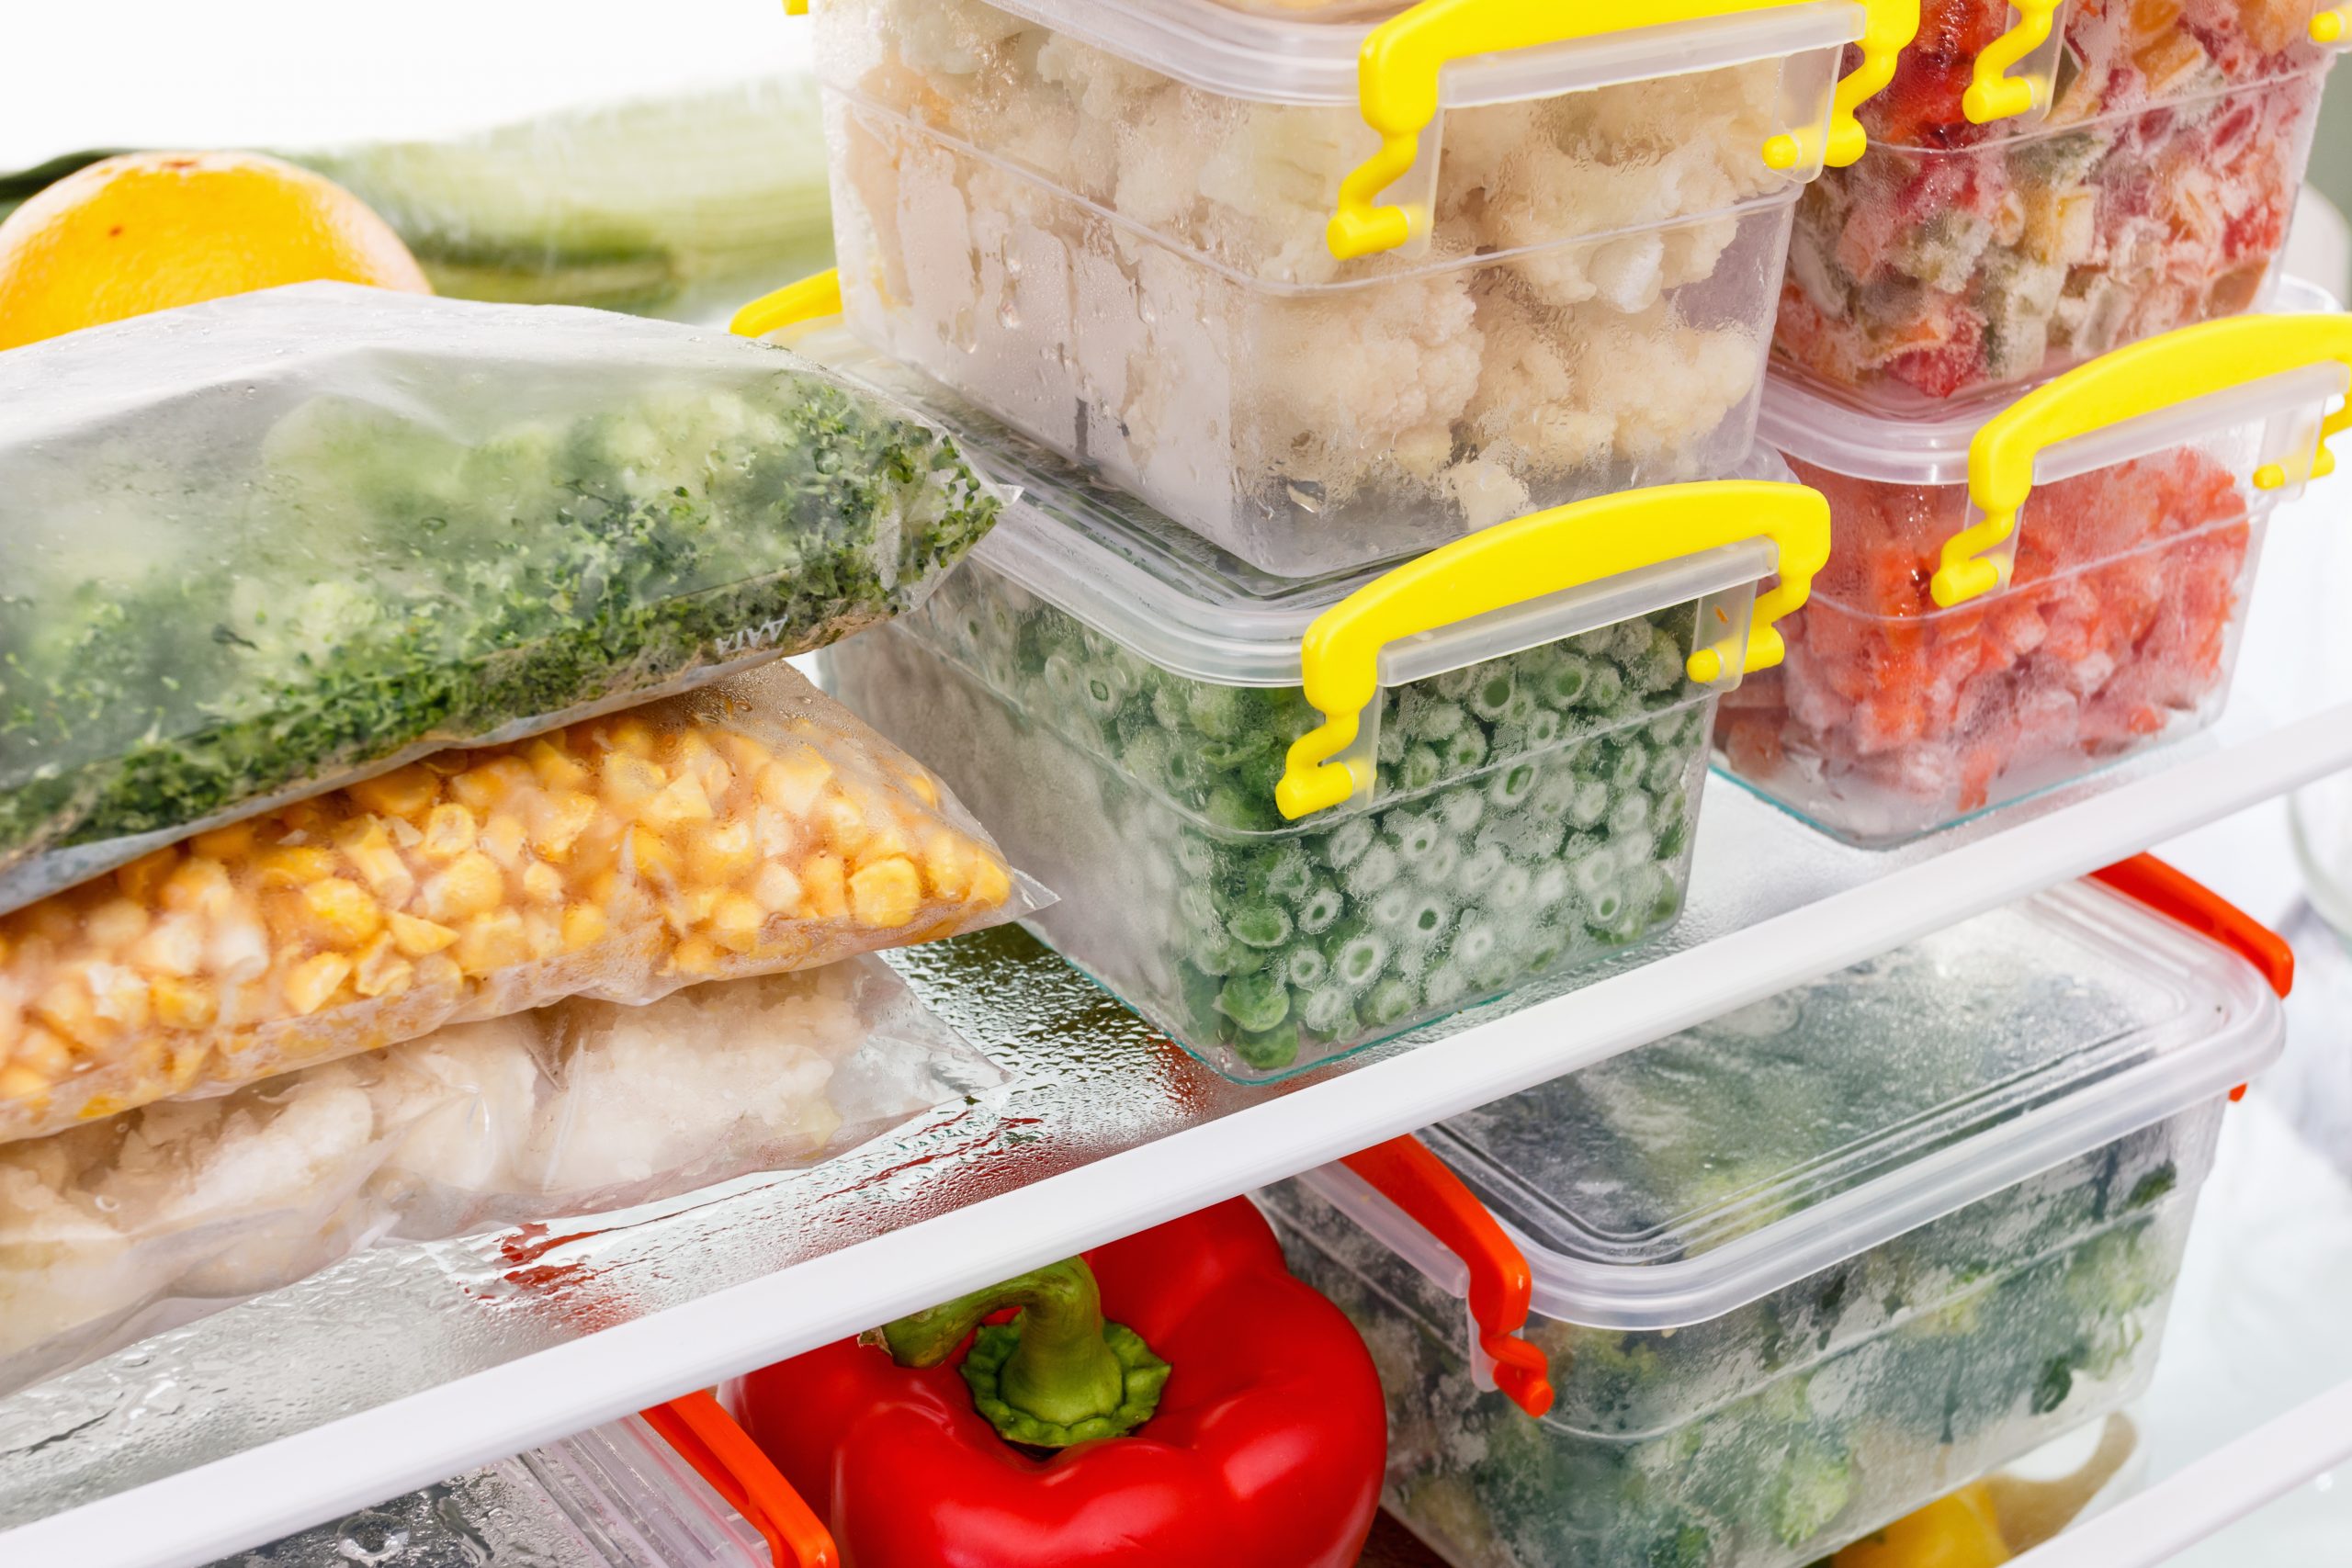 Your Non-Toxic Kitchen Part 2: 3 Tips for Safer Food Storage